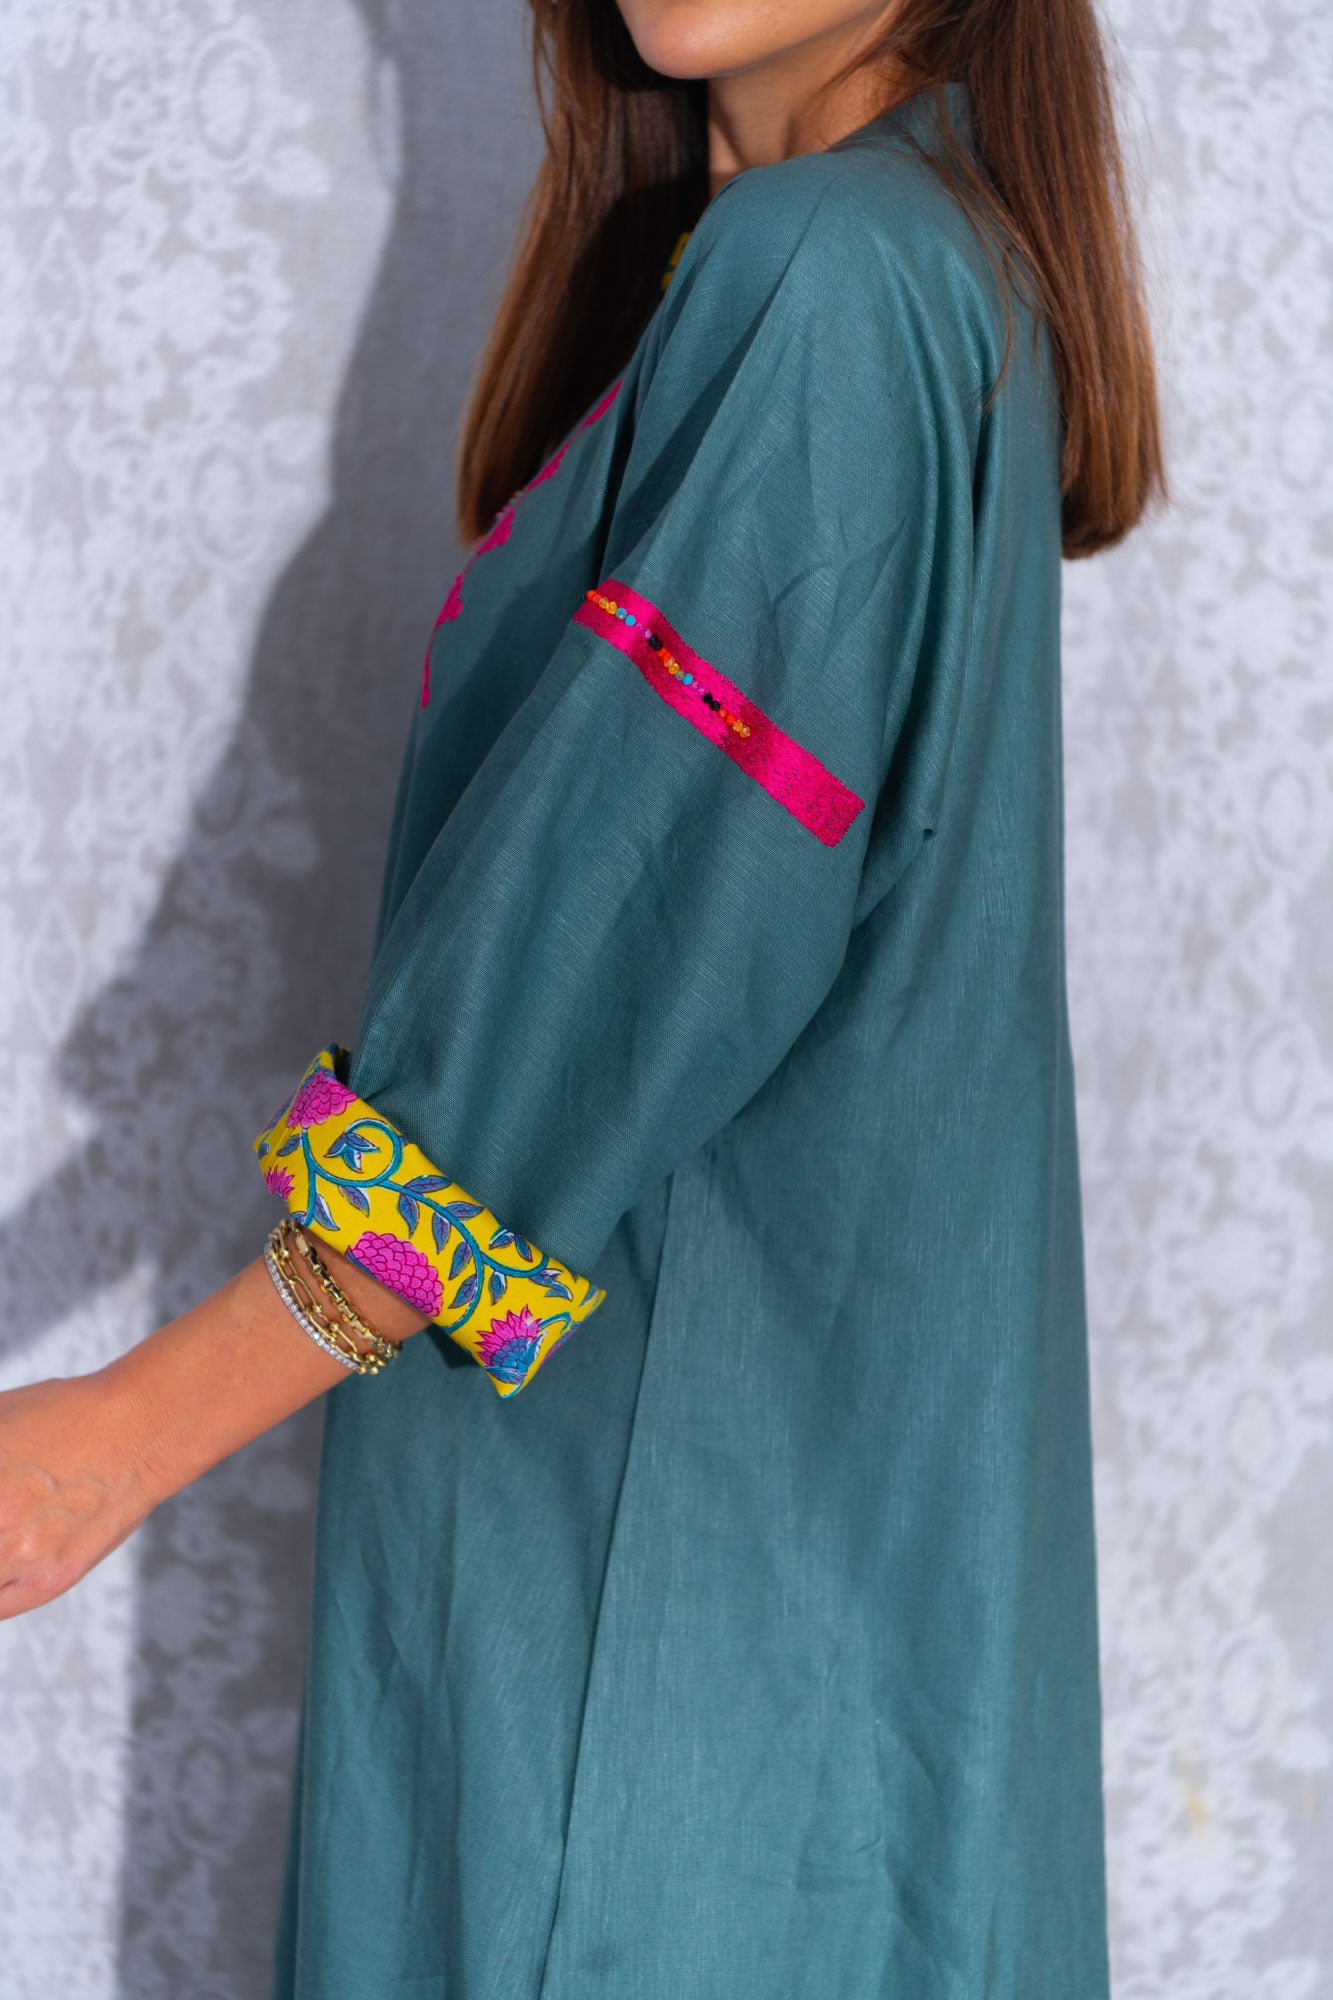 Green and Hot Pink Linen Abaya with Embroidery - Chic Fusion Dress